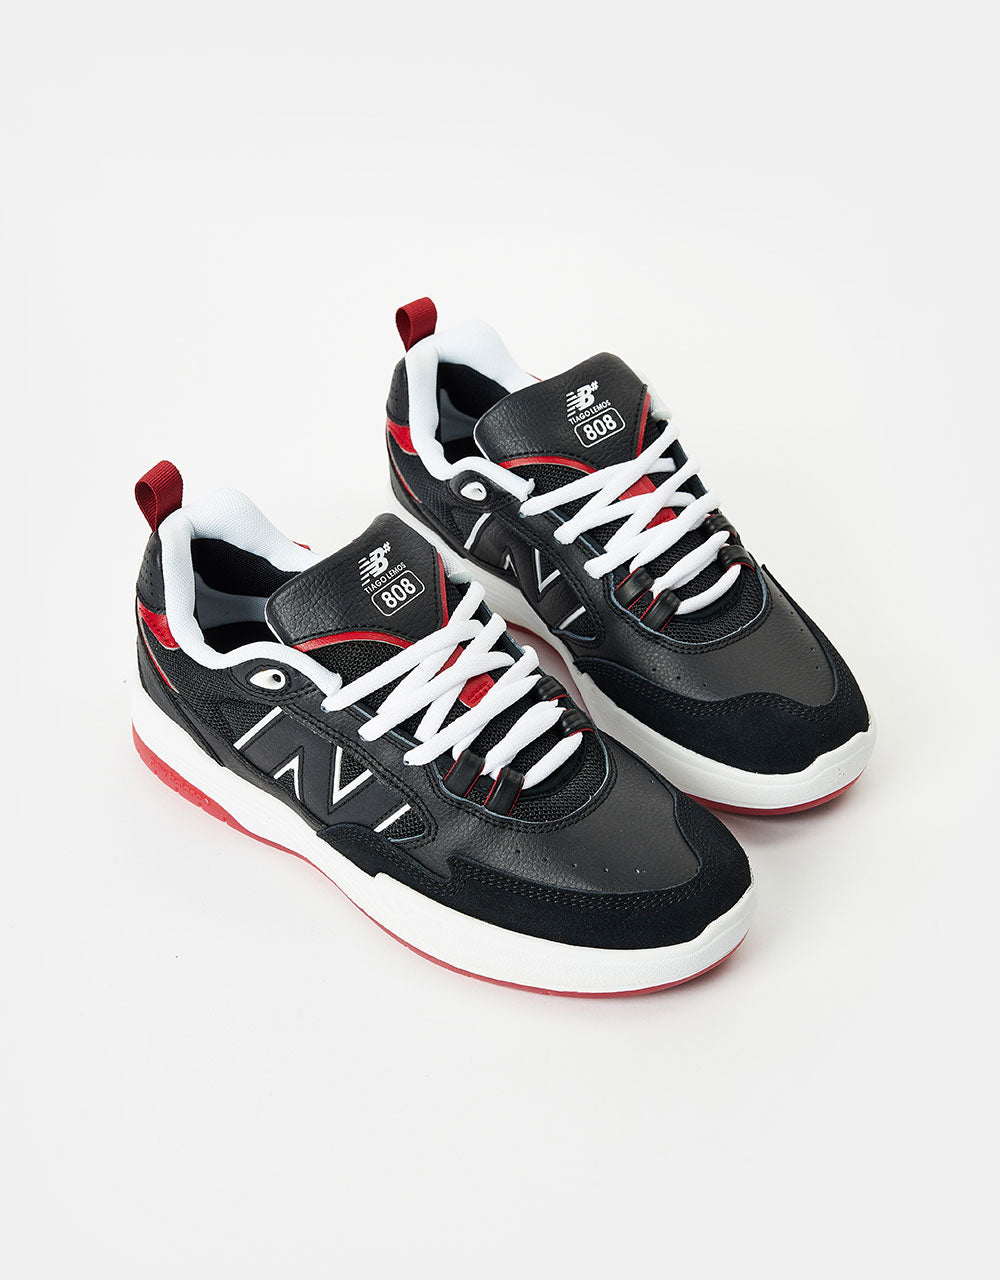 New Balance Numeric 808 Skate Shoes - Black/Red